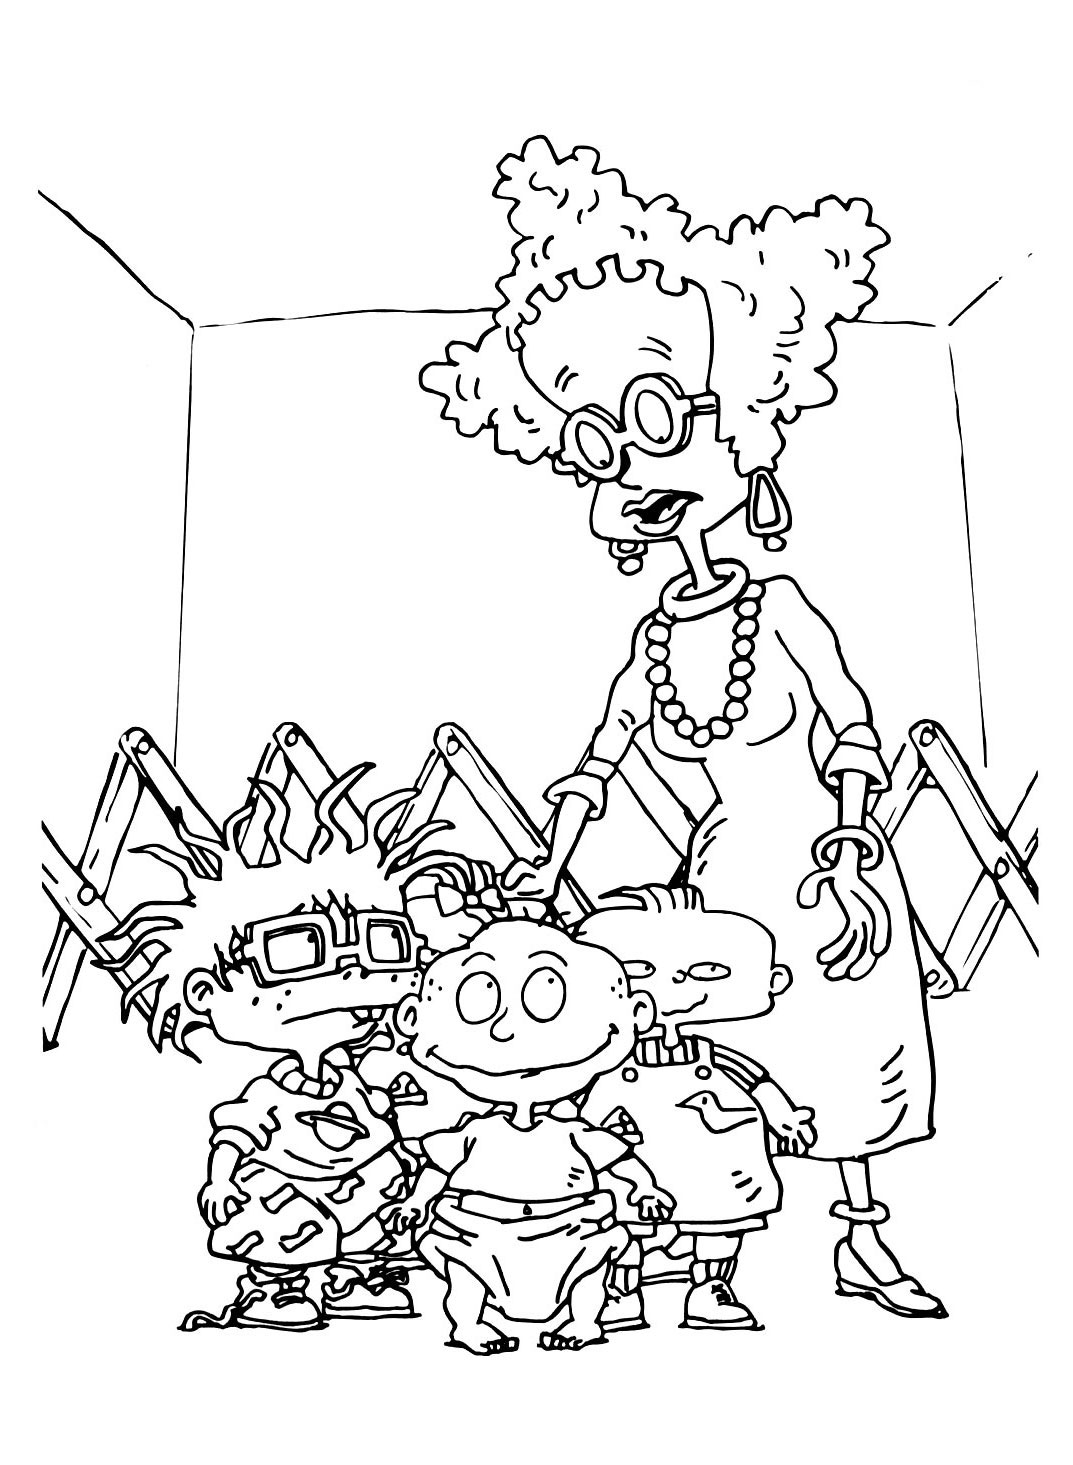 Coloring books on x happy mothers day mothersday rugrats pickles mom httpstcotytrmlvpr x